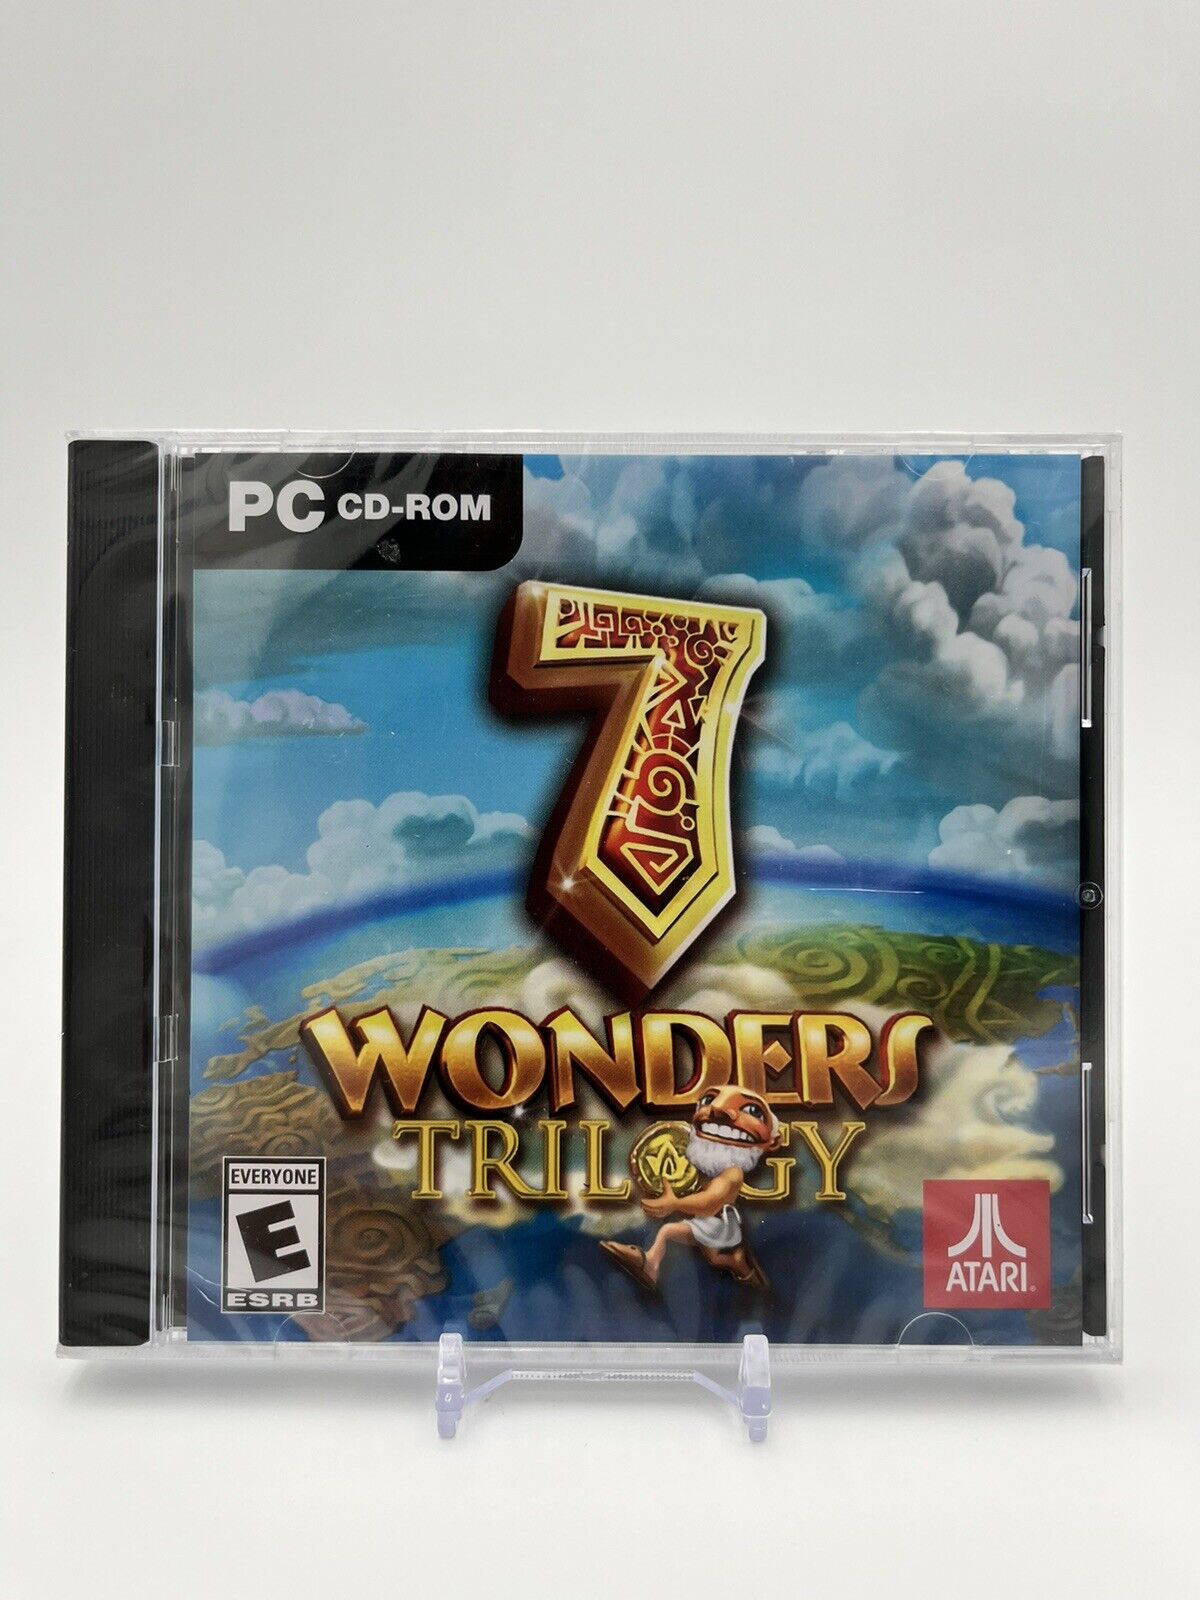 7 Wonders Trilogy Brand New 3 Great PC Games Windows 7 Or Higher Puzzles Atari